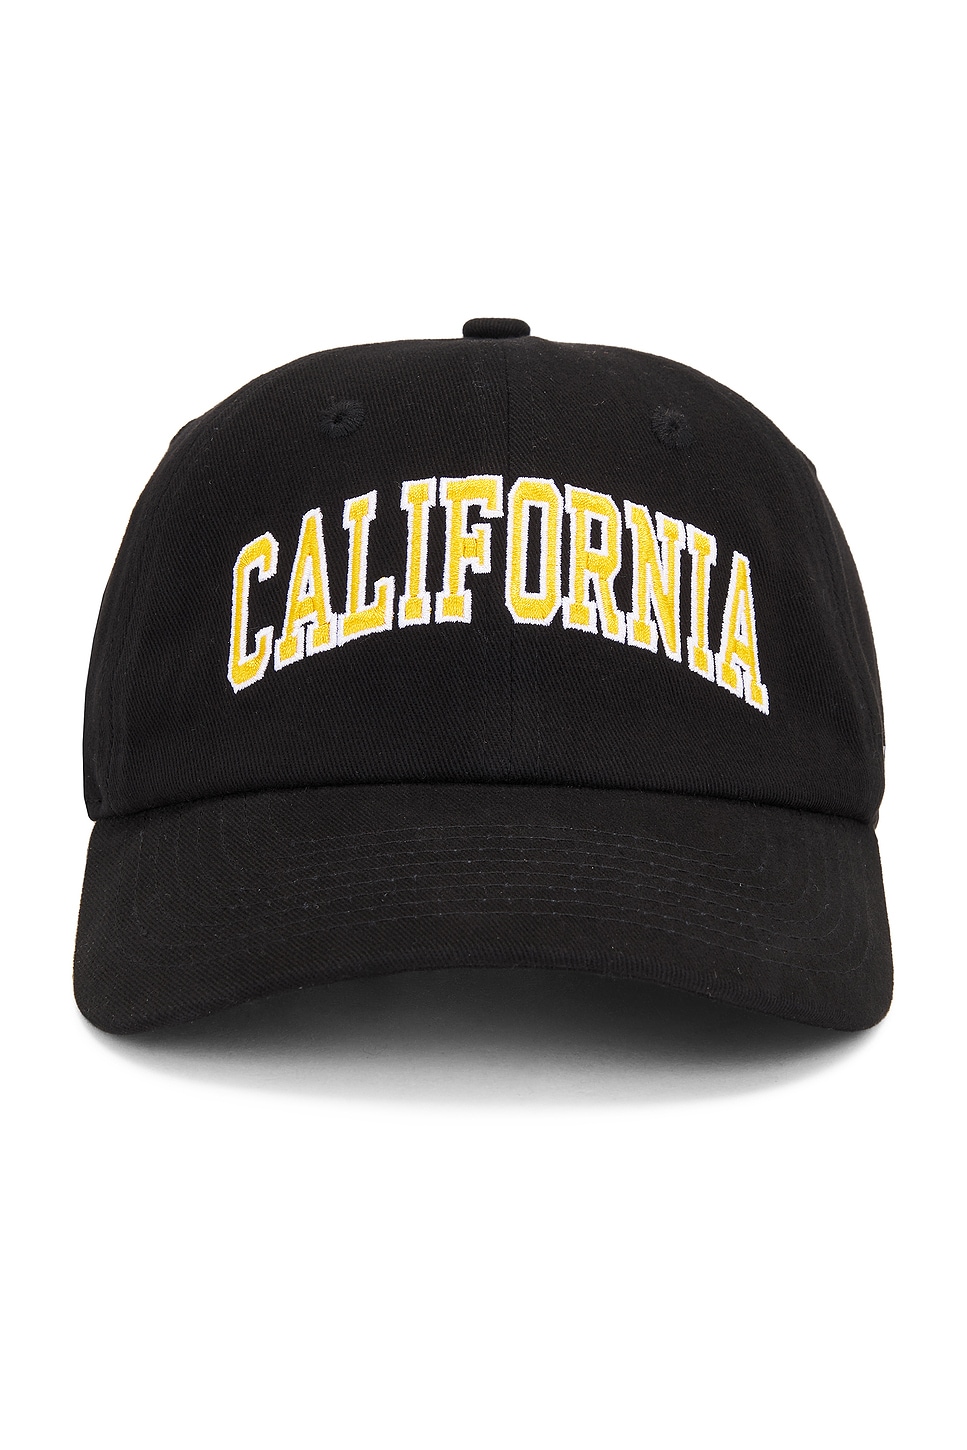 California Embroidered Hat in Black